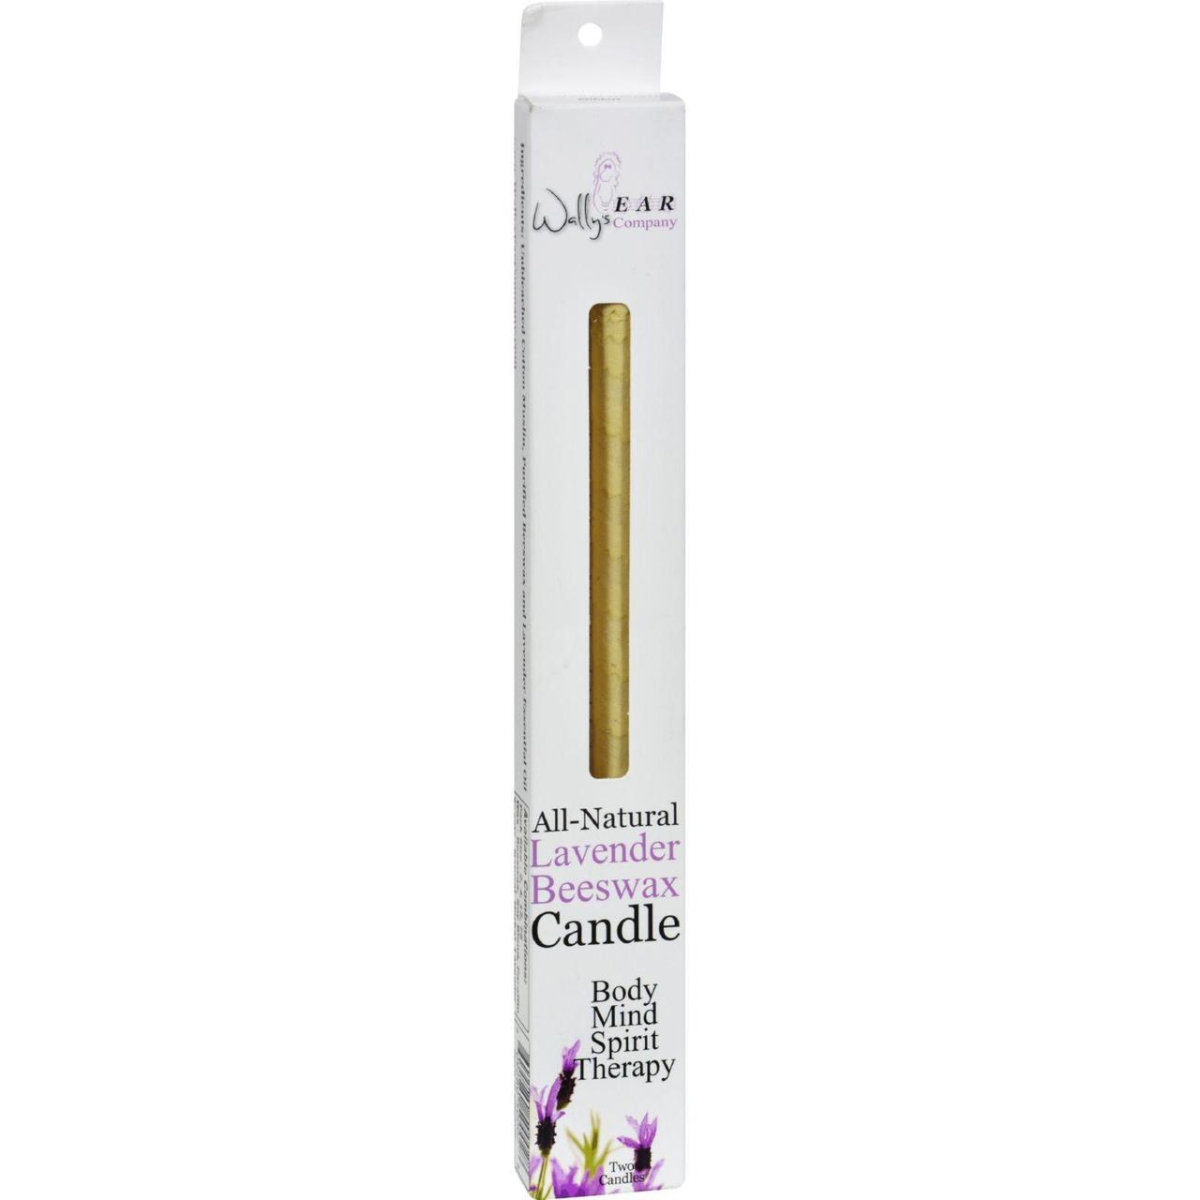 Hg0835140 Beeswax Candles, Lavender - Pack Of 2